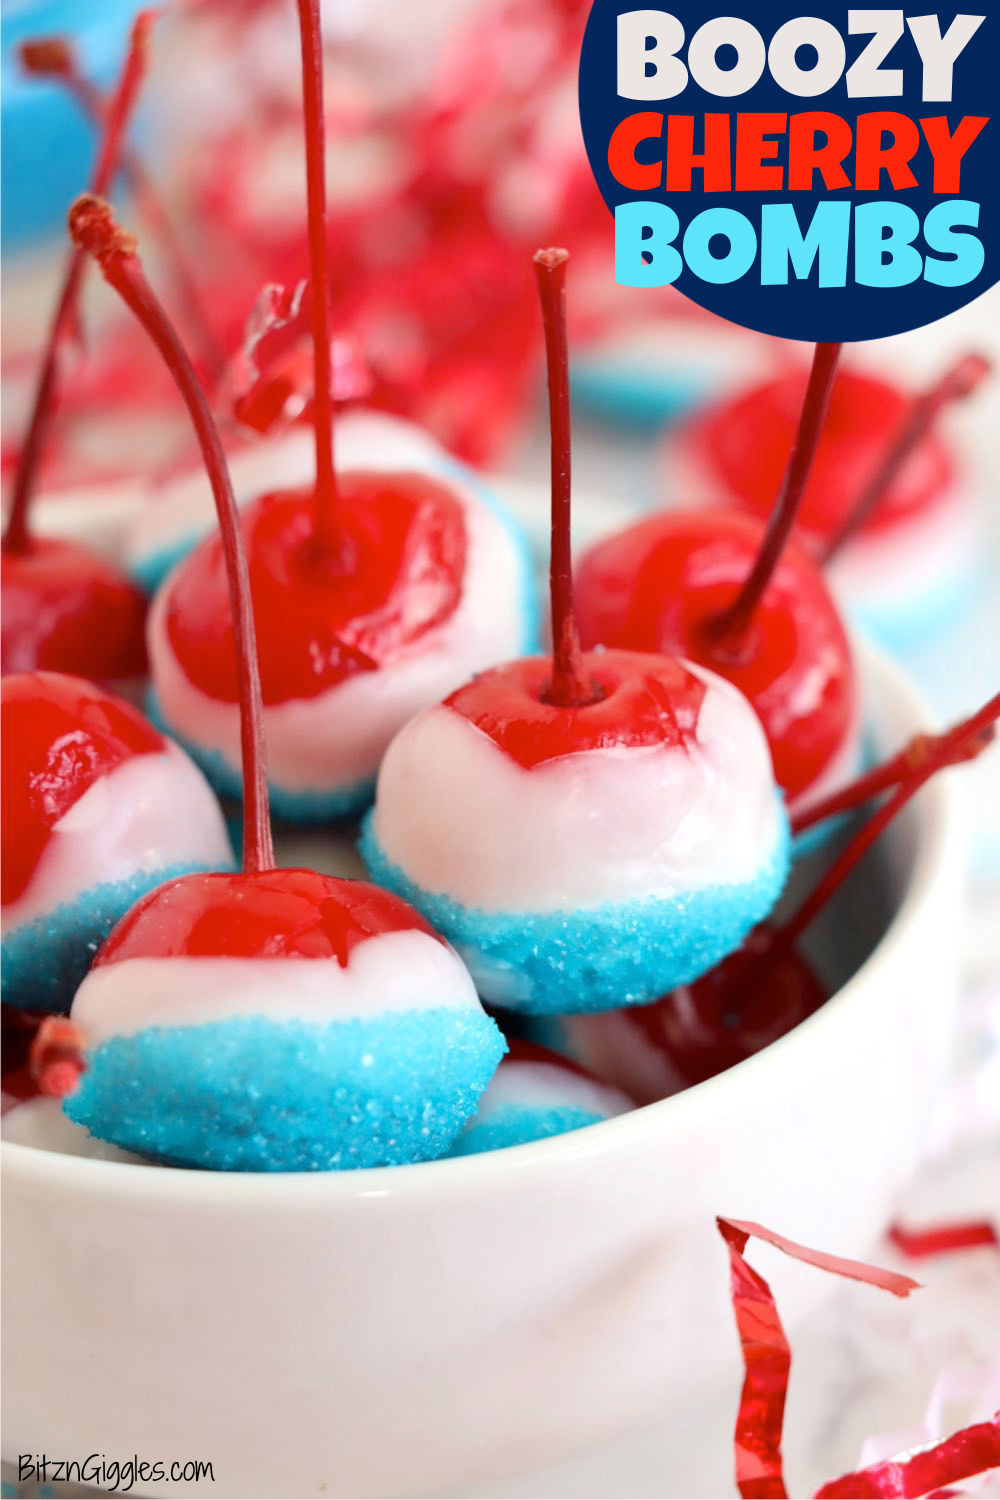 White bowl filled with red, white and blue cherry bombs.